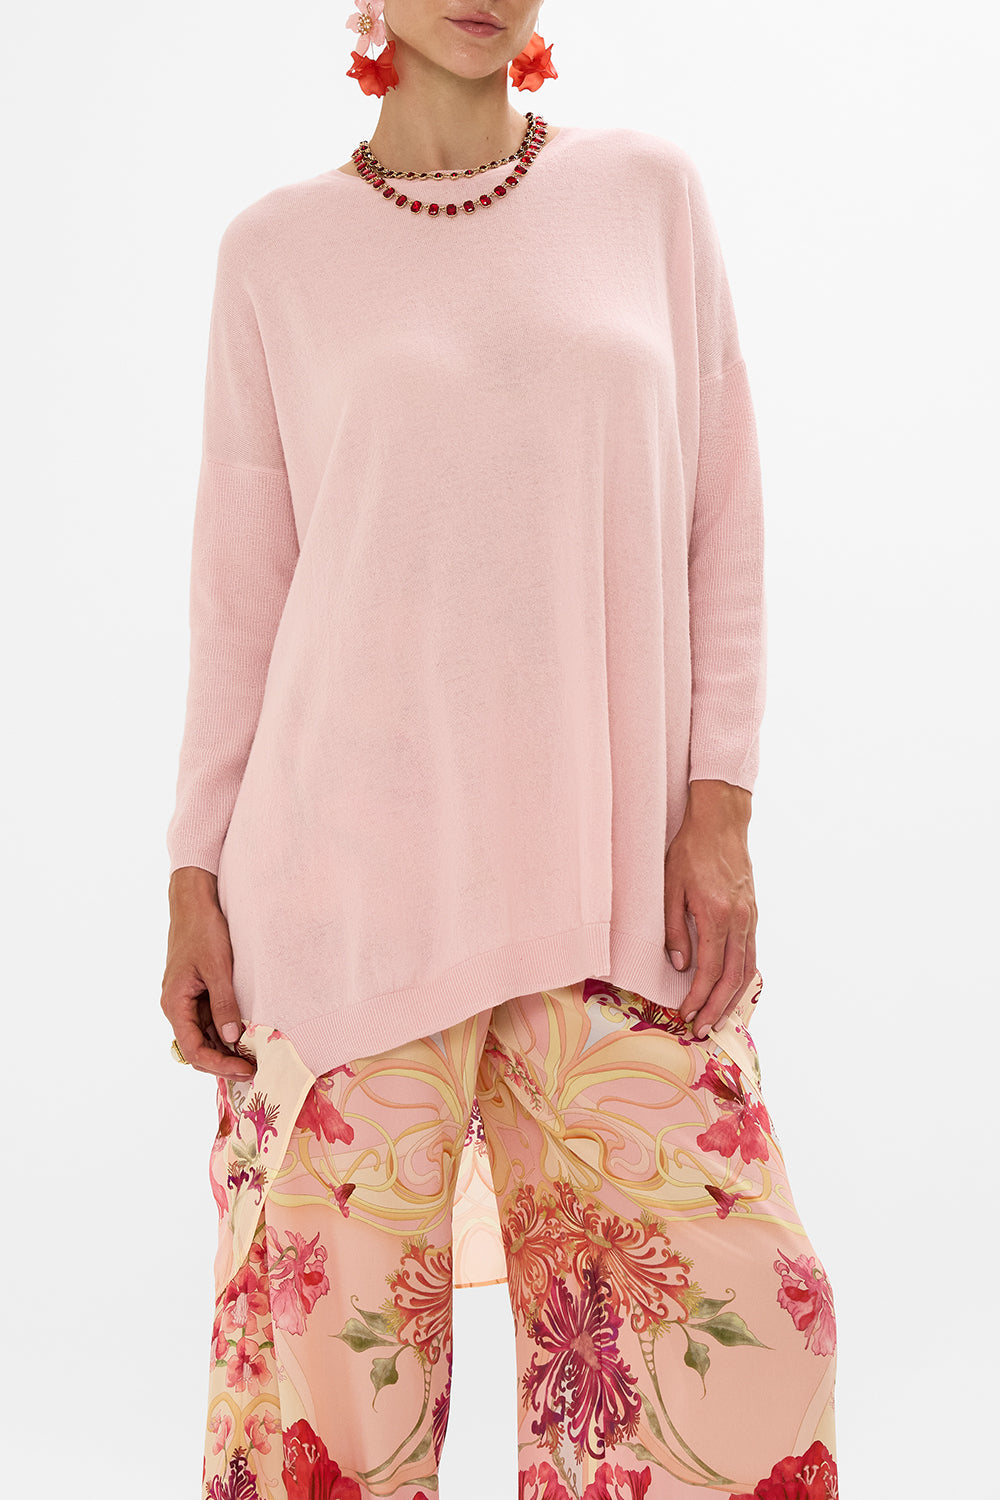 CAMILLA floral  long sleeve jumper in Blossoms And Brushstrokes print.